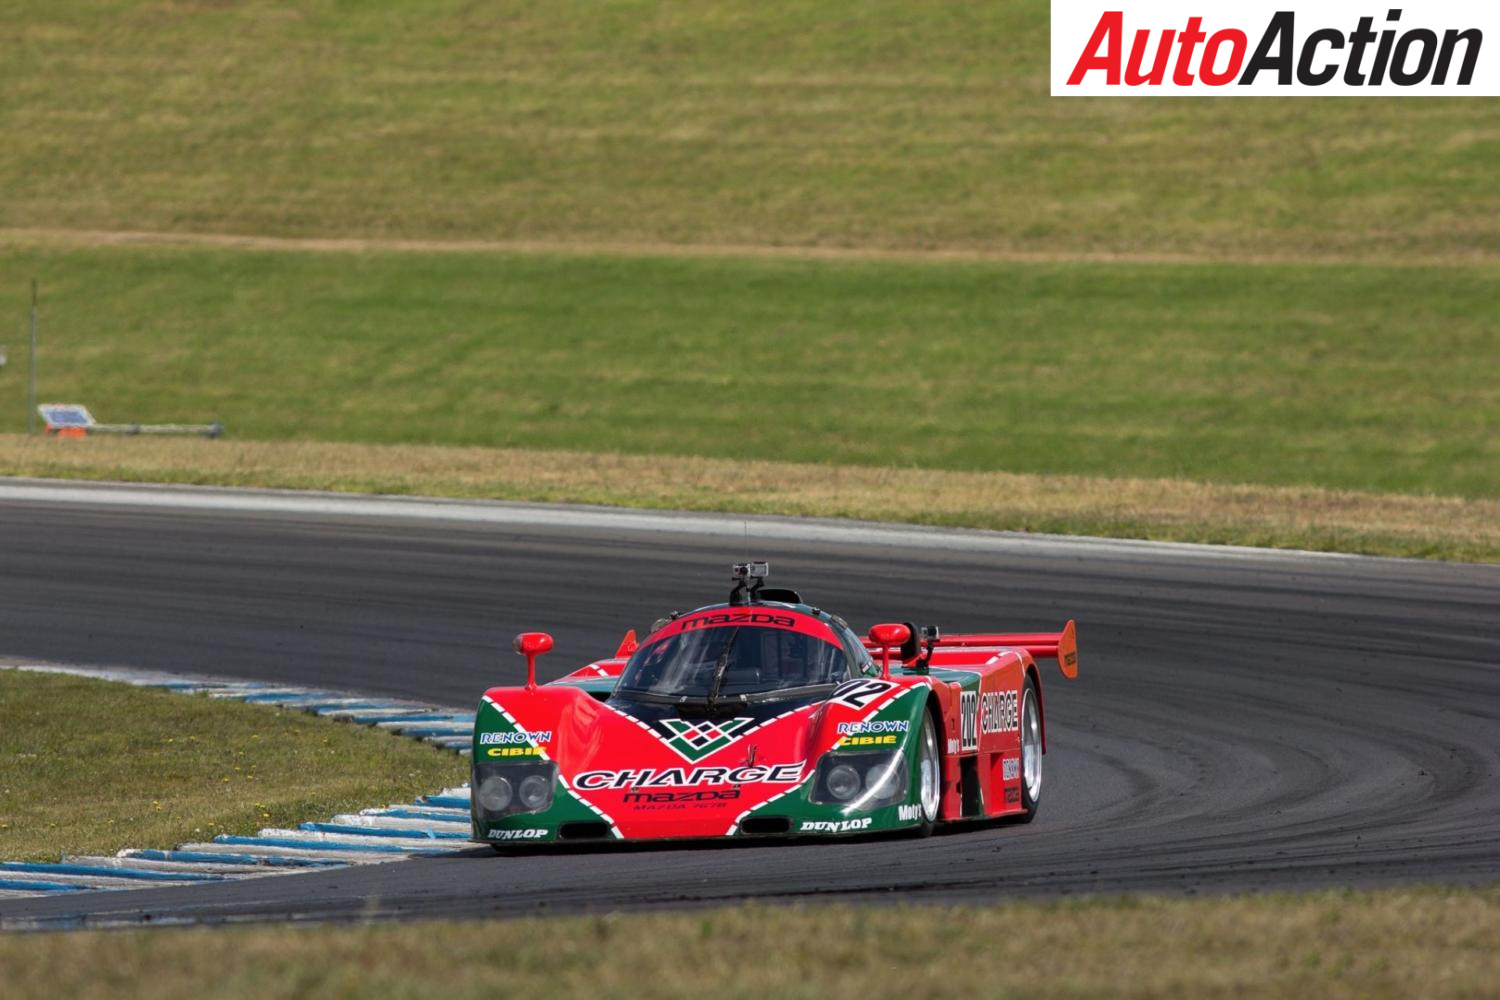 The Mazda 767B at World Time Attack in 2014 - Photo: Rhys Vandersyde